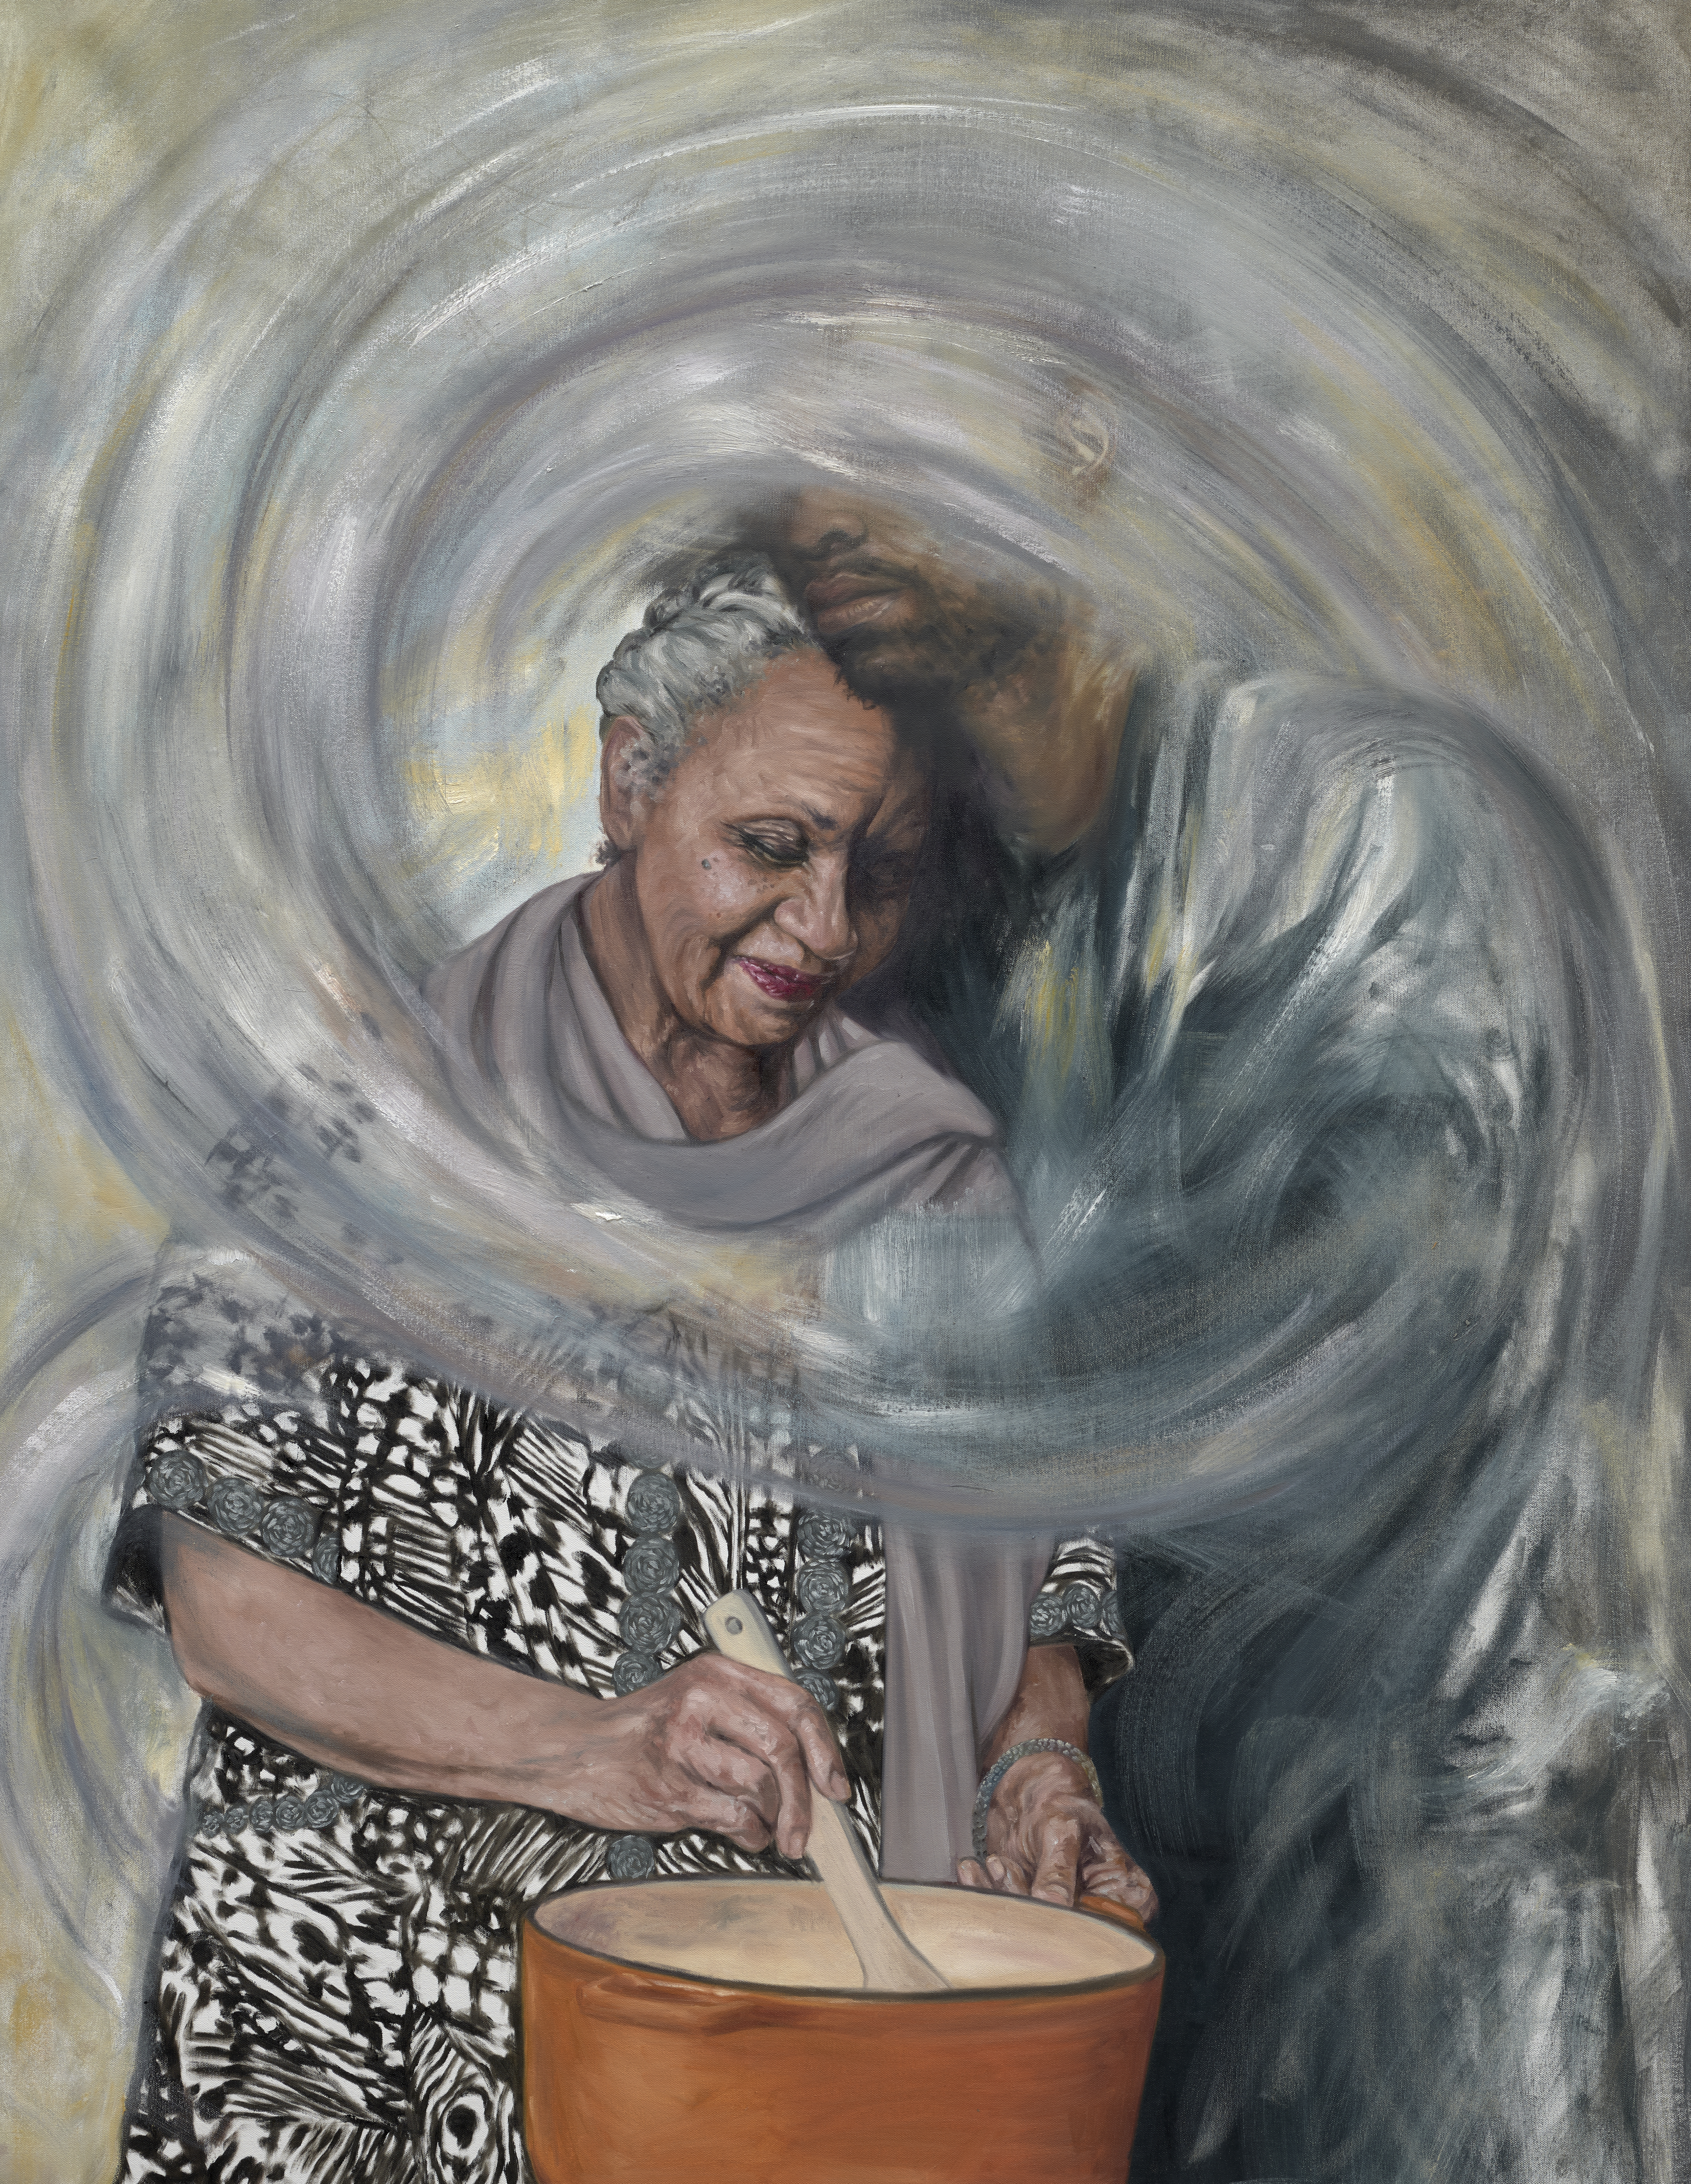 Oil painting portrait of a man (who's details are blurred) wrapping an arm around an older woman with medium-dark skin tone, grey hair in a bun, as she stirs a wooden spoon in a pot